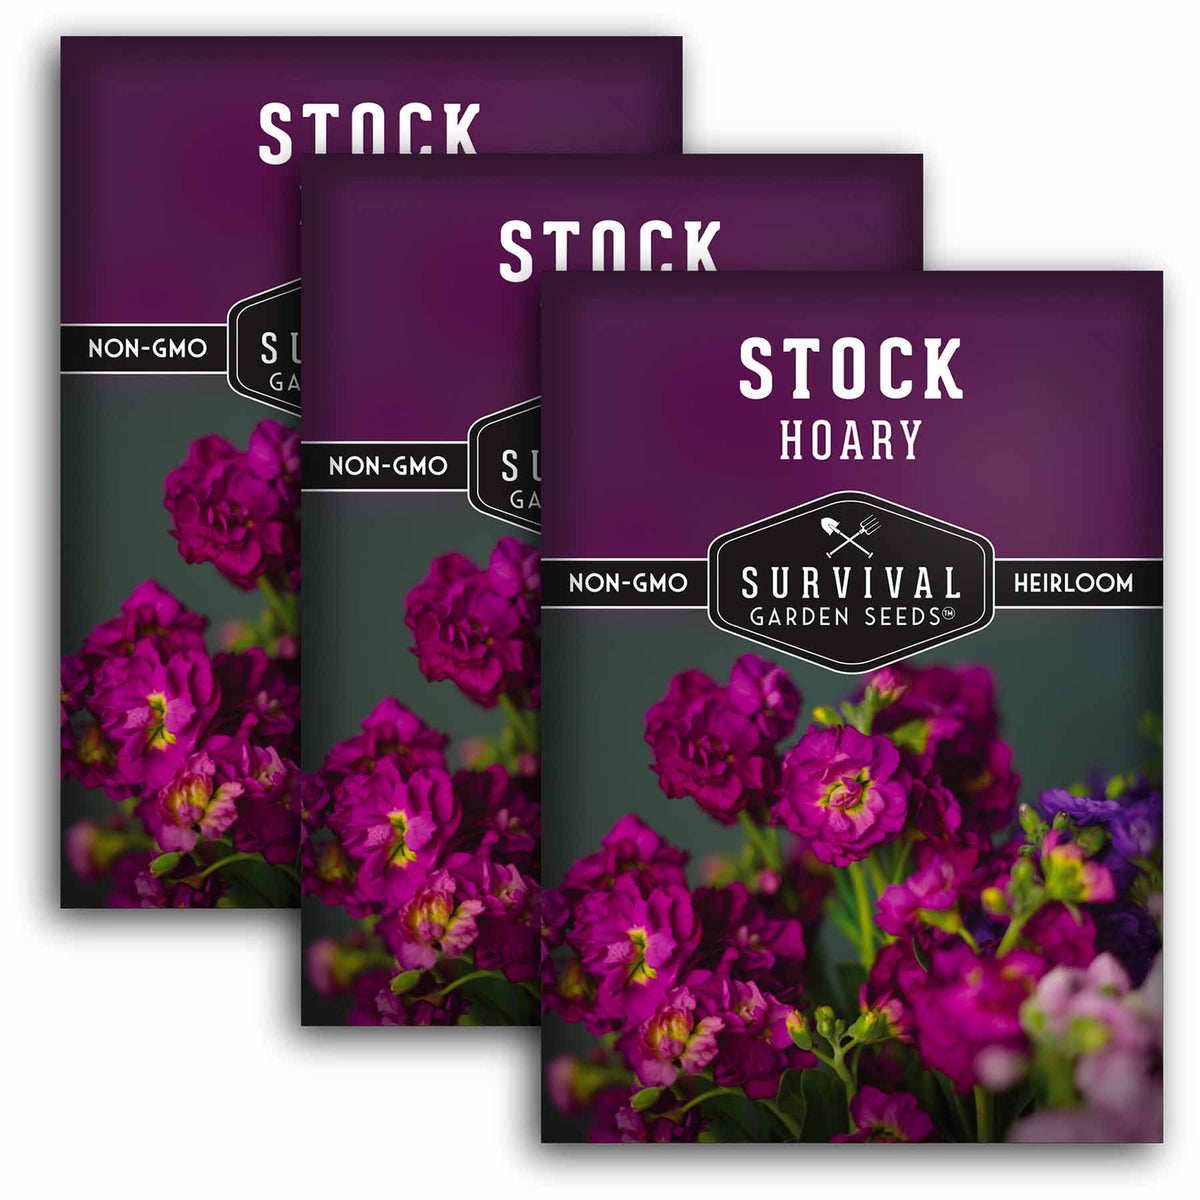 3 packets of Hoary Stock seeds